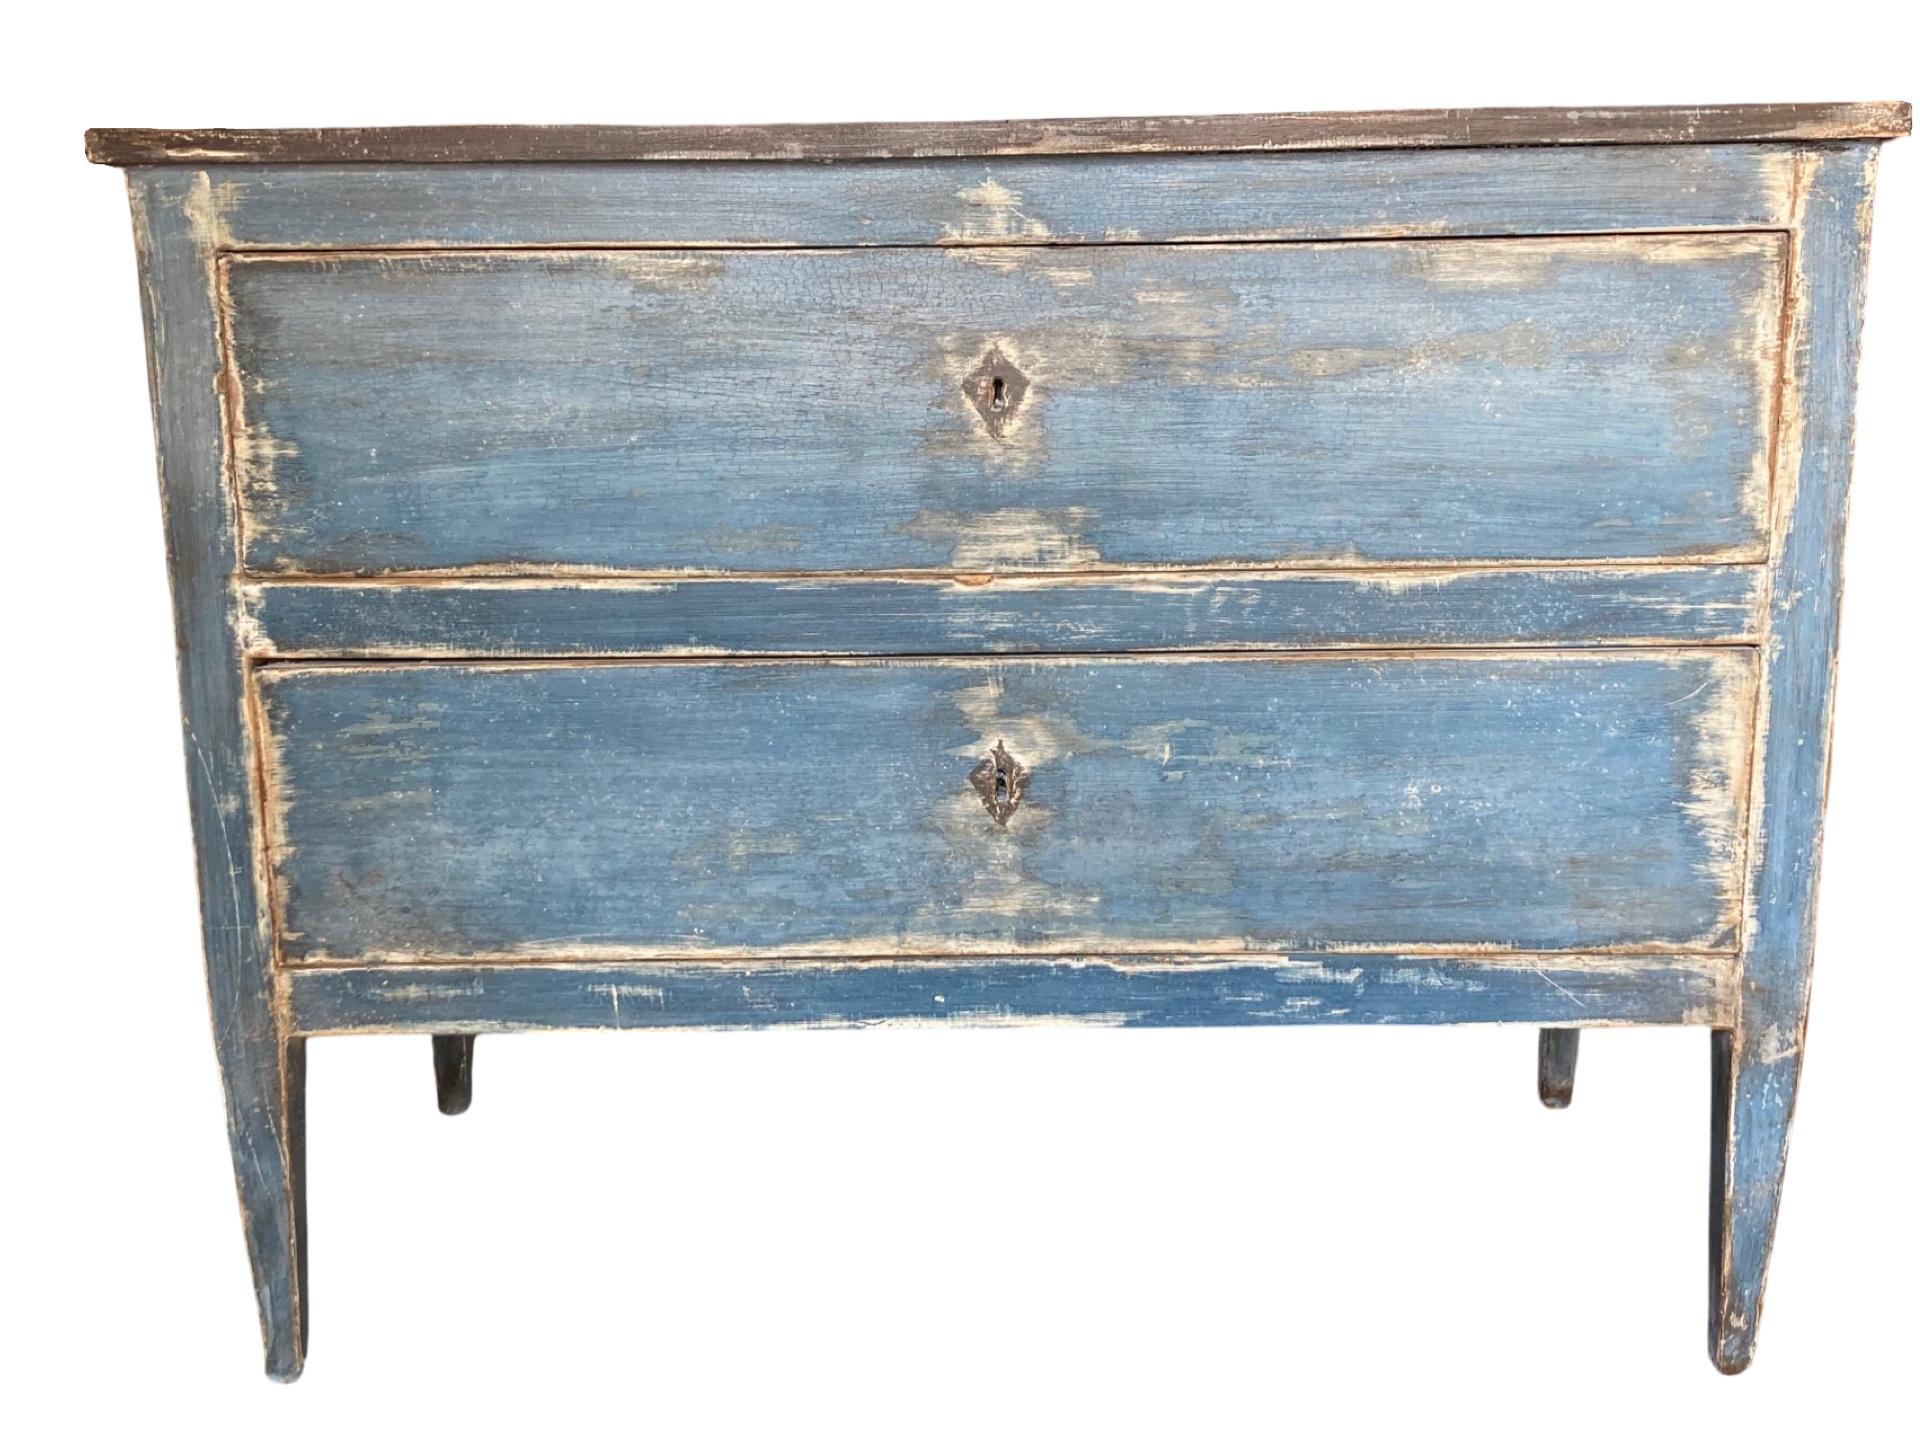 Neoclassical commode hand-made in Italy in the mid to late 1700s using walnut. The commode shows very simple lines, as typical of the style, which give it a very modern look. The blue color (which is not original) but has fantastic patina. The chest